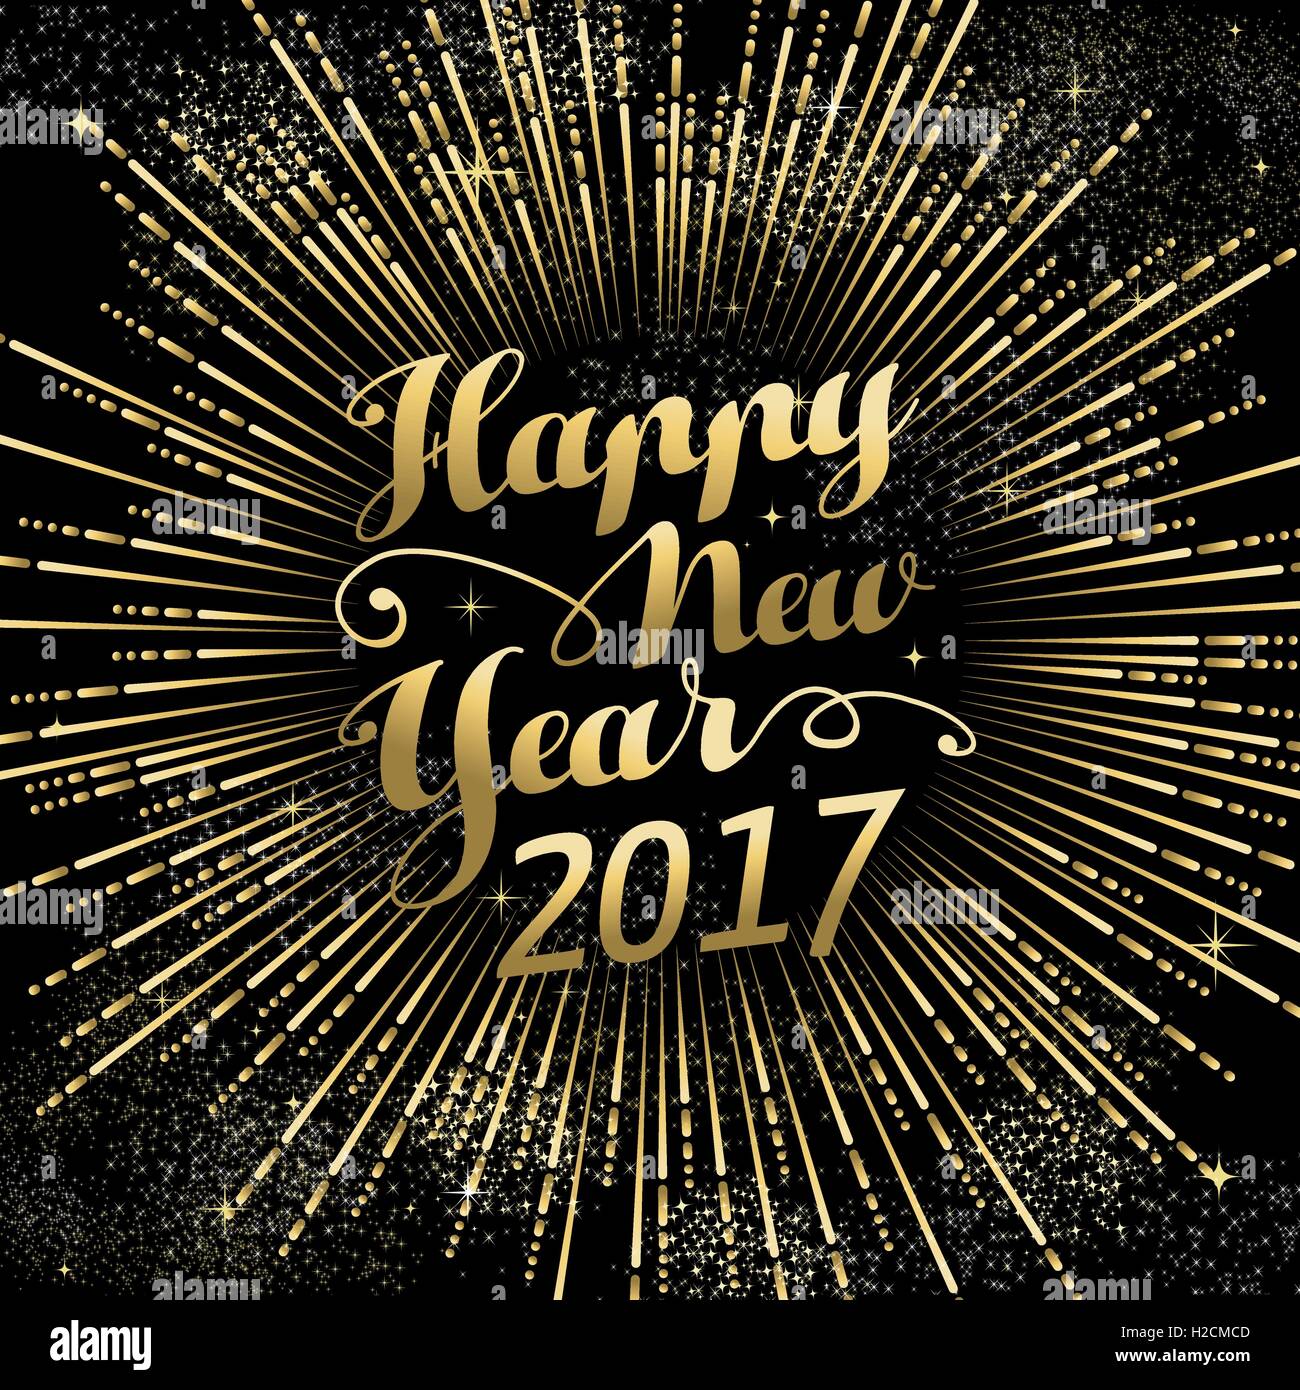 Happy New Year 2017 gold background with text quote and firework explosion. Luxury holiday greeting card design. EPS10 vector. Stock Vector